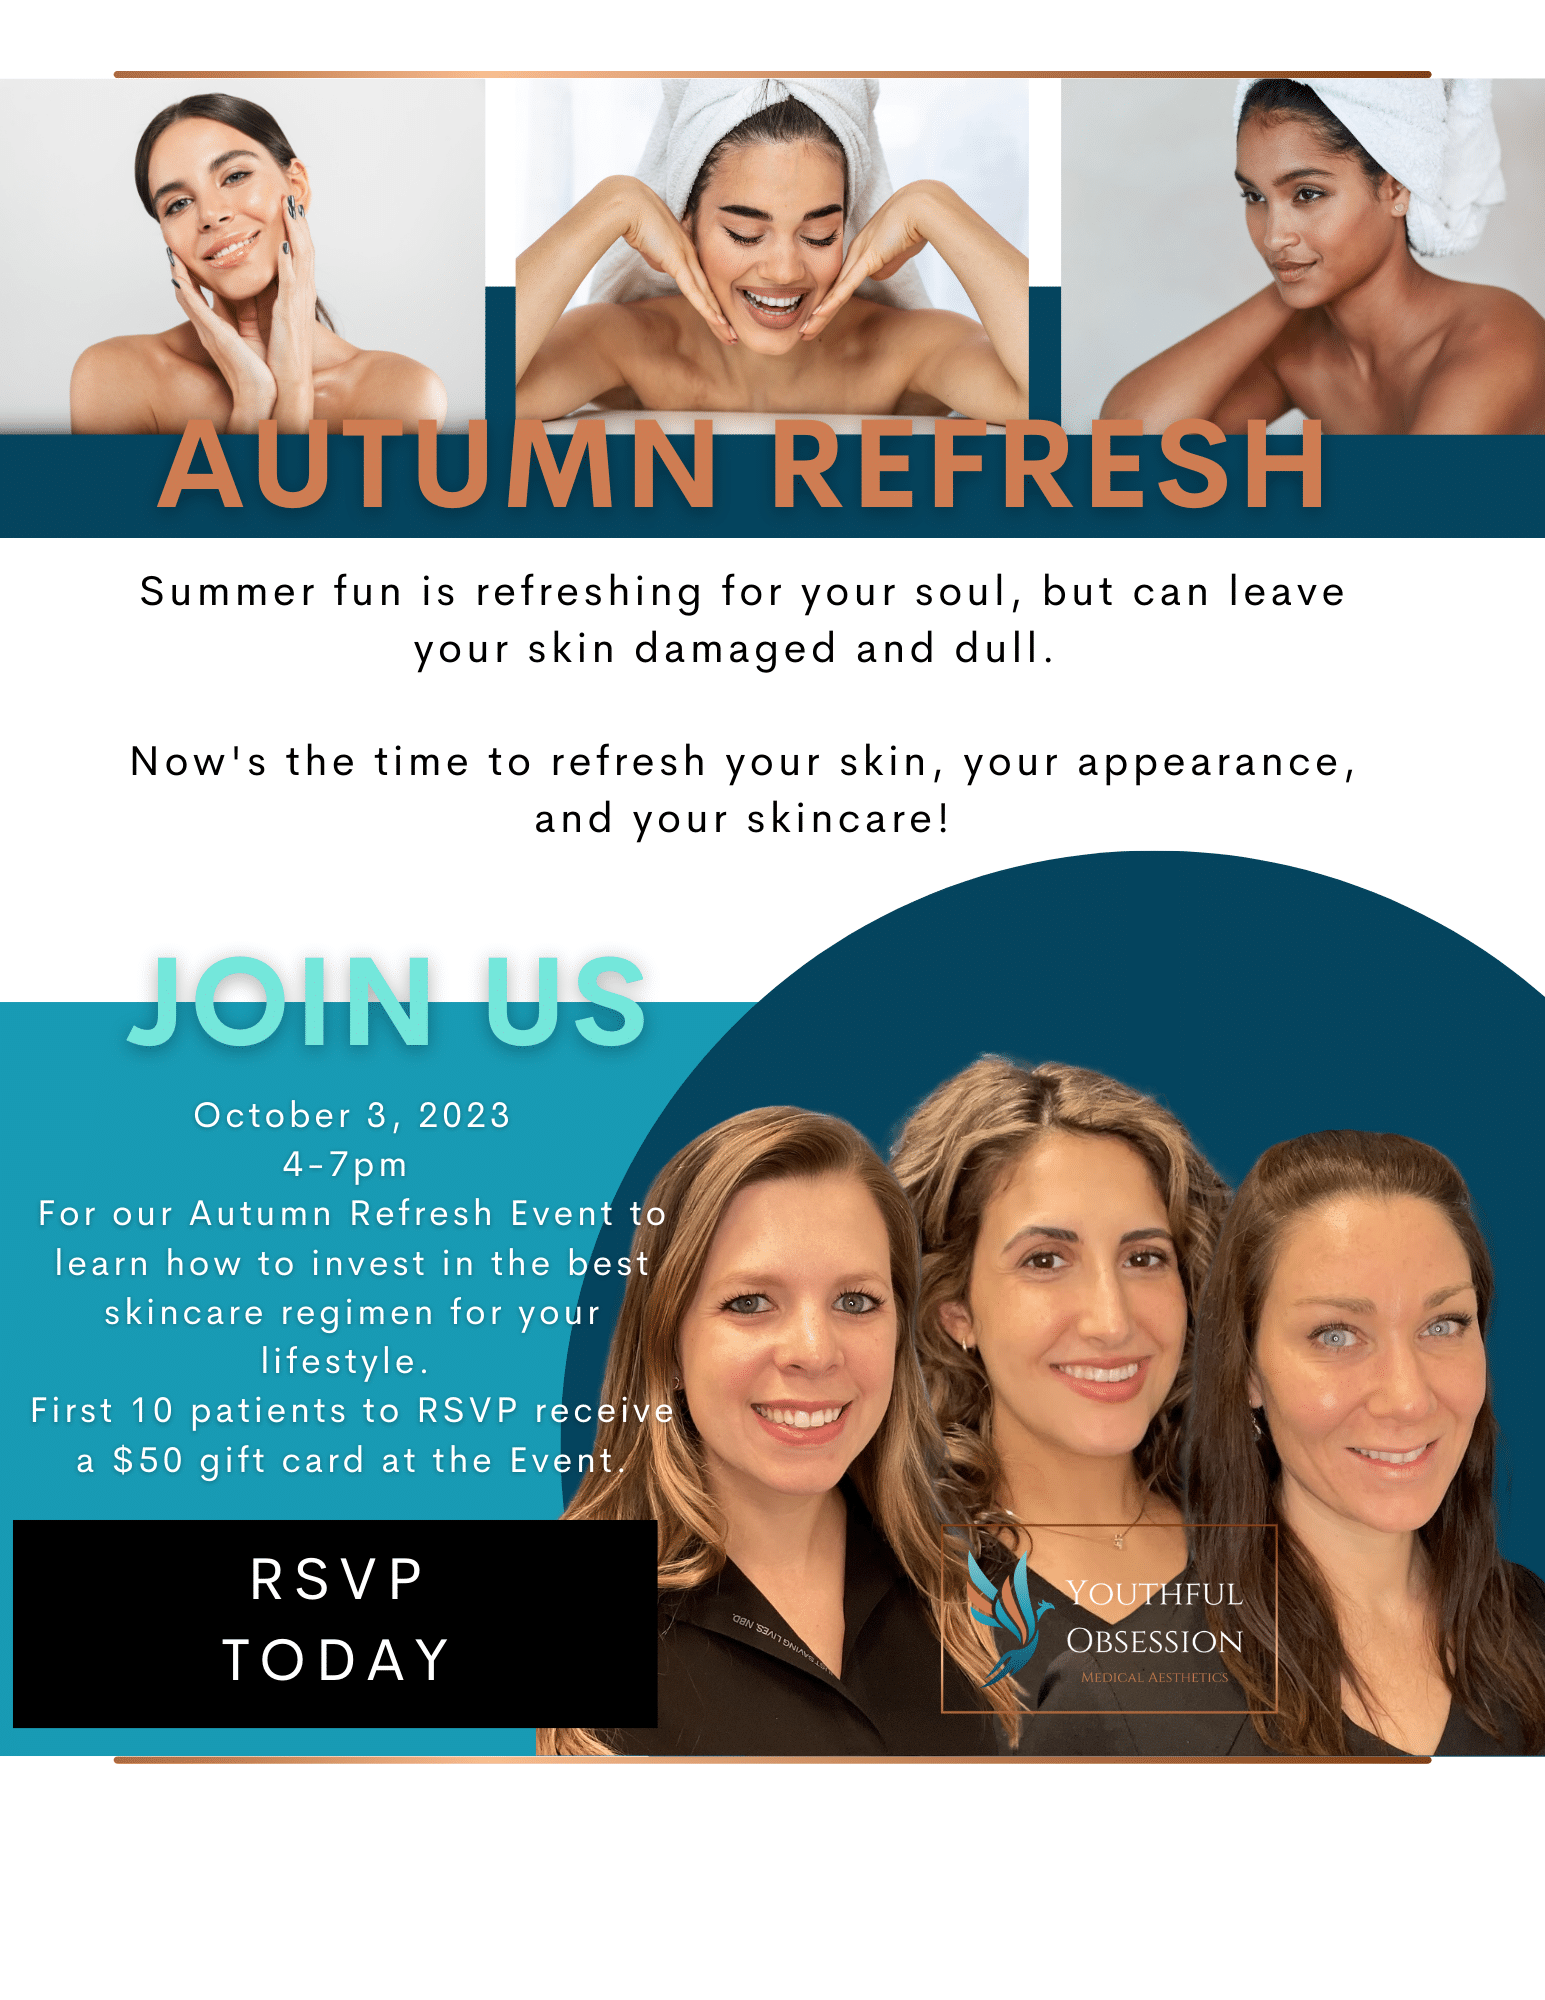 Autumn Refresh Event October 3, 2023 from 4-7pm at Youthful Obsession in Edgewater, MD. Specials include BBL HERO, dermal fillers, neruotoxin, chemical peels and RF microneedling